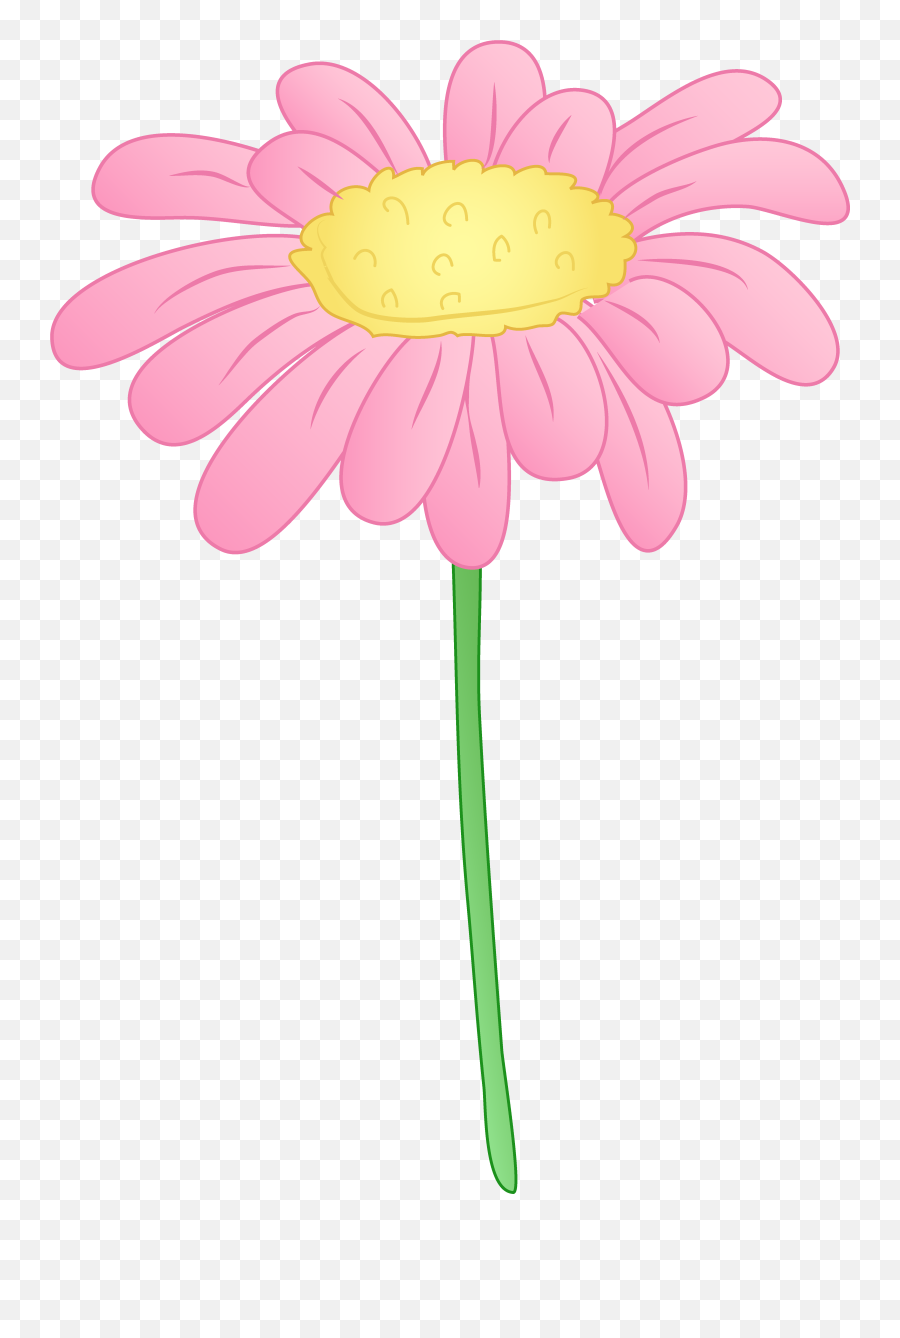 Library Of Flower Cartoon Png Free Files - Cartoon Image Single Flowers,Flower Cartoon Png